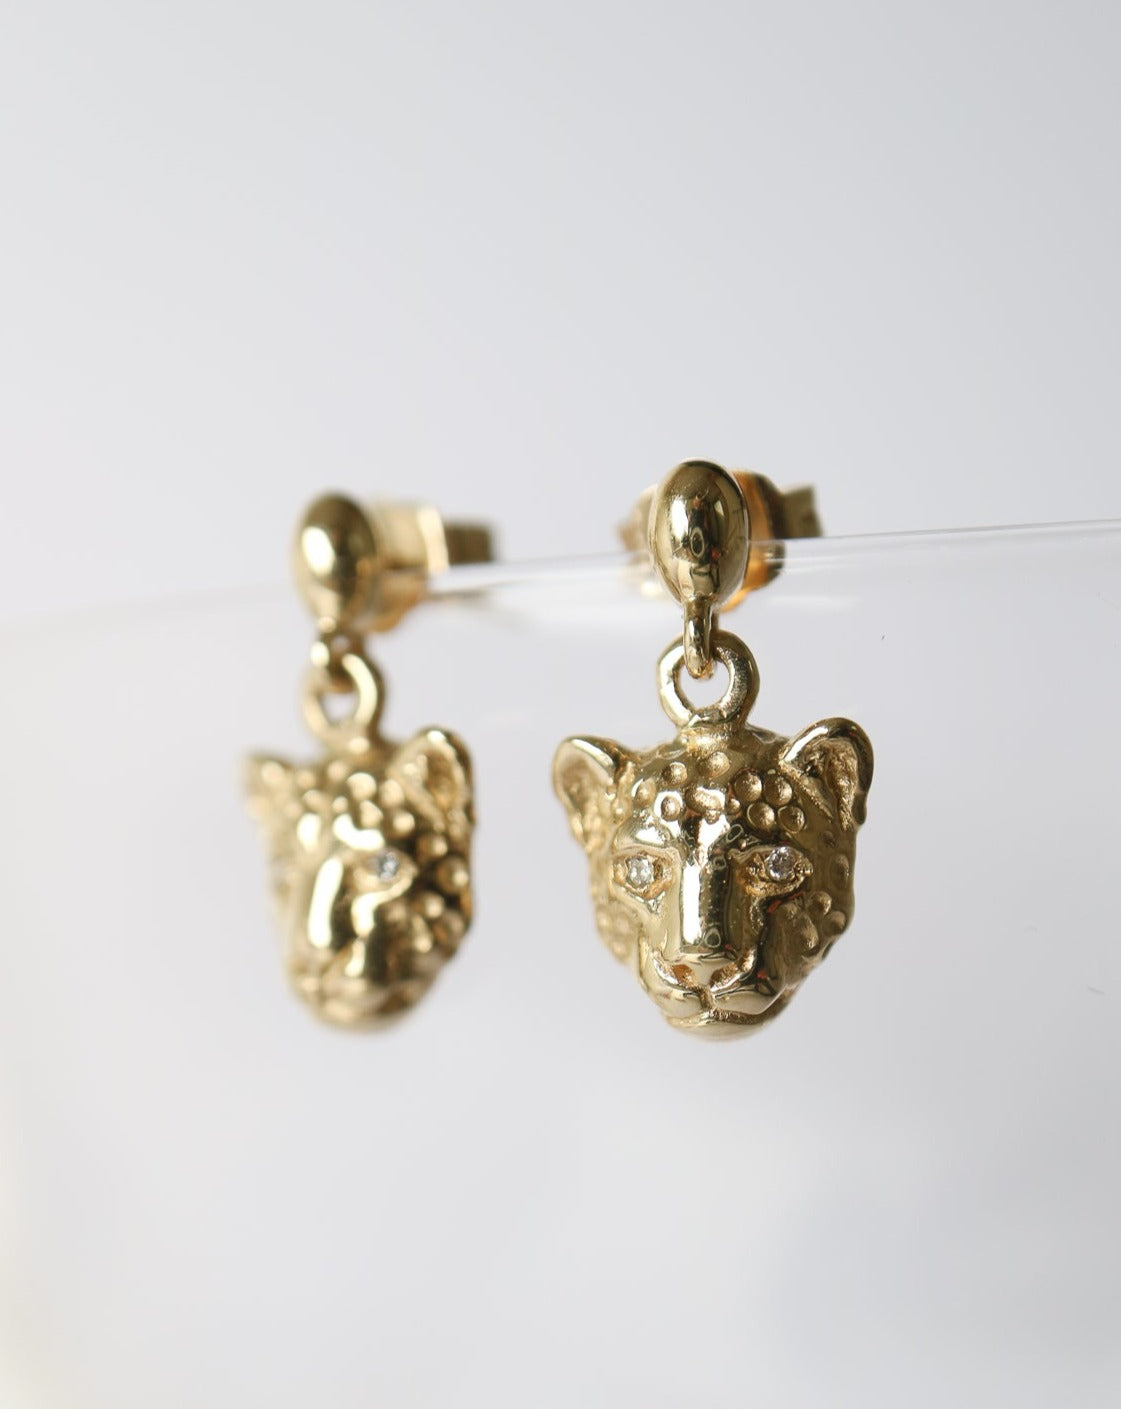 9kt gold Leopard Drop Earrings by Collective & Co Jewellery South Africa